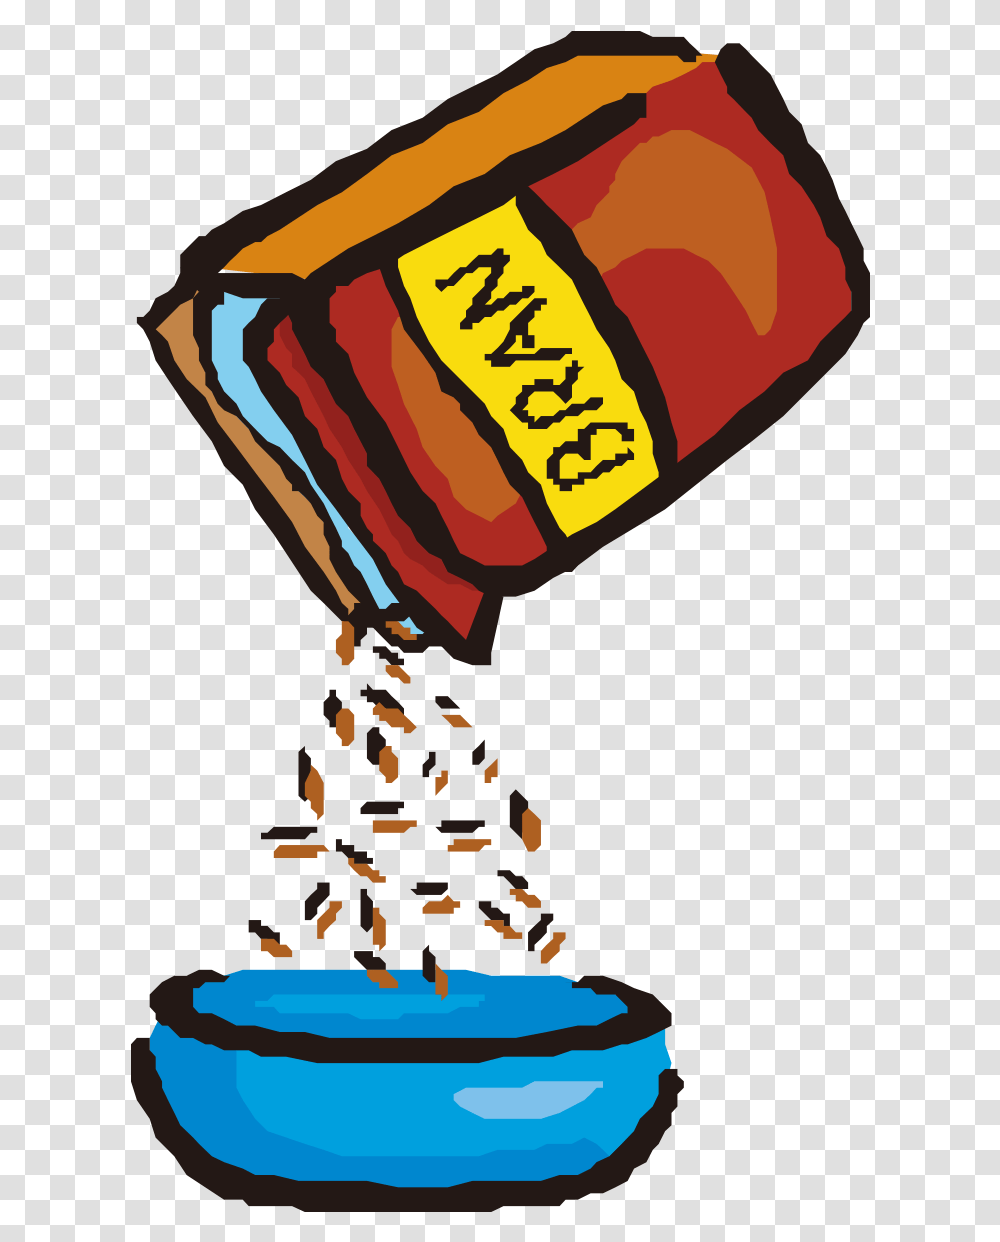 Kellogg S All Bran Complete Wheat Flakes Cereal Clip French Toast Clip Art, Beverage, Drink, Alcohol, Glass Transparent Png